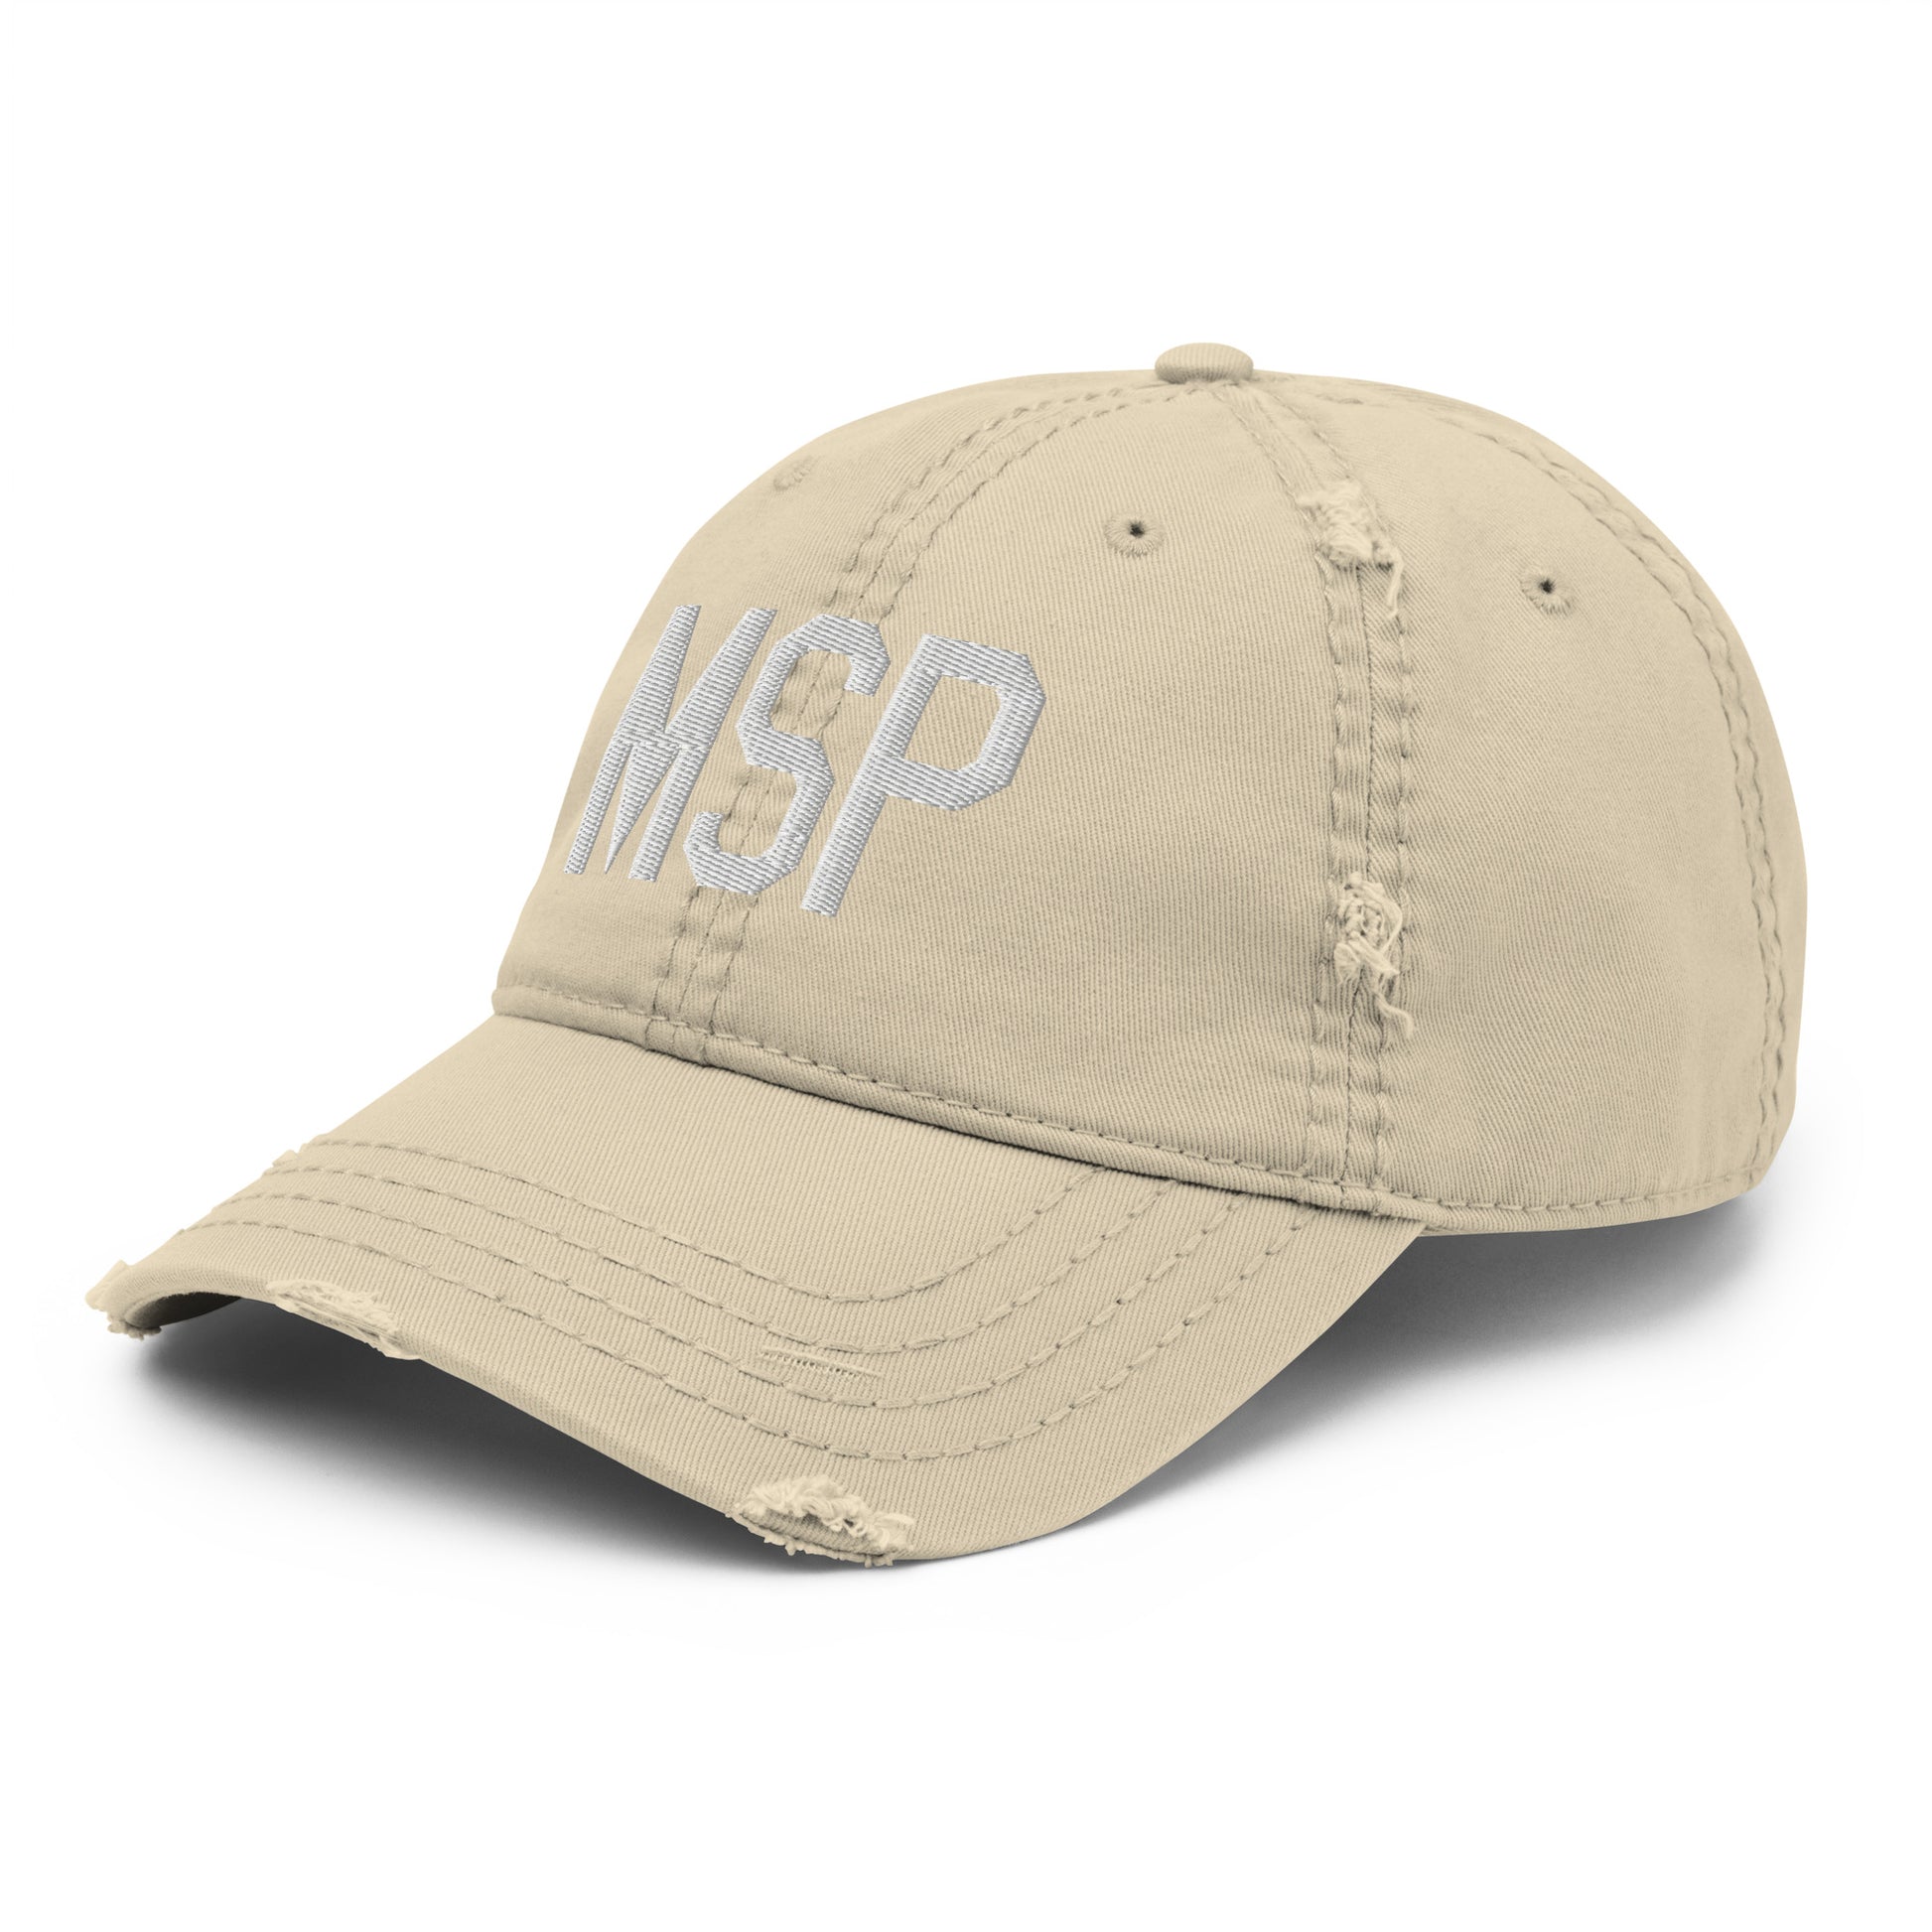 Airport Code Distressed Hat - White • MSP Minneapolis • YHM Designs - Image 19